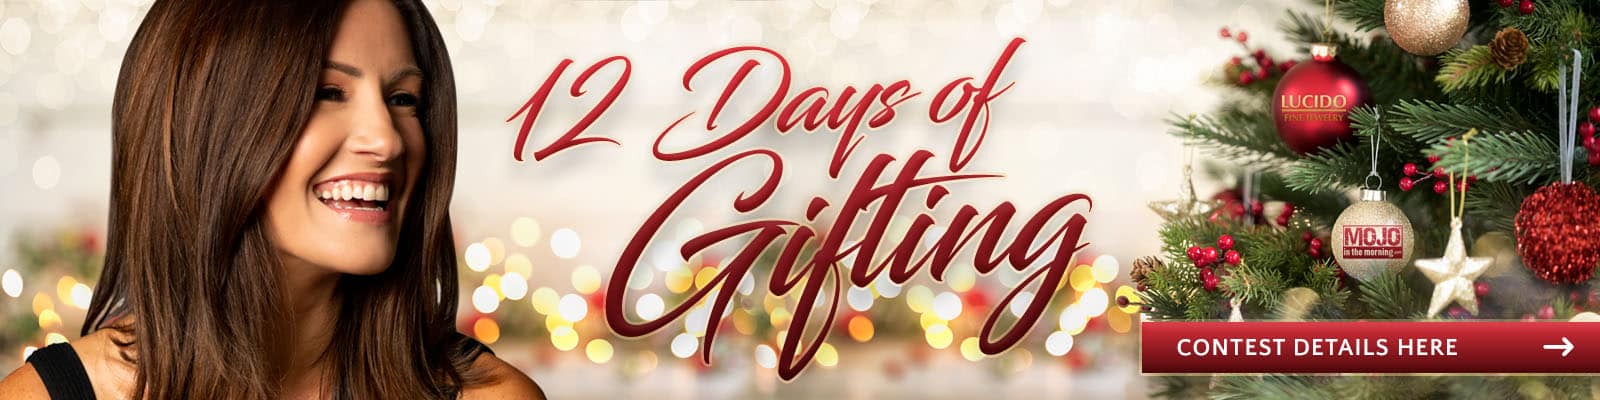 Lucido Fine Jewelry - 12 Days of Gifting